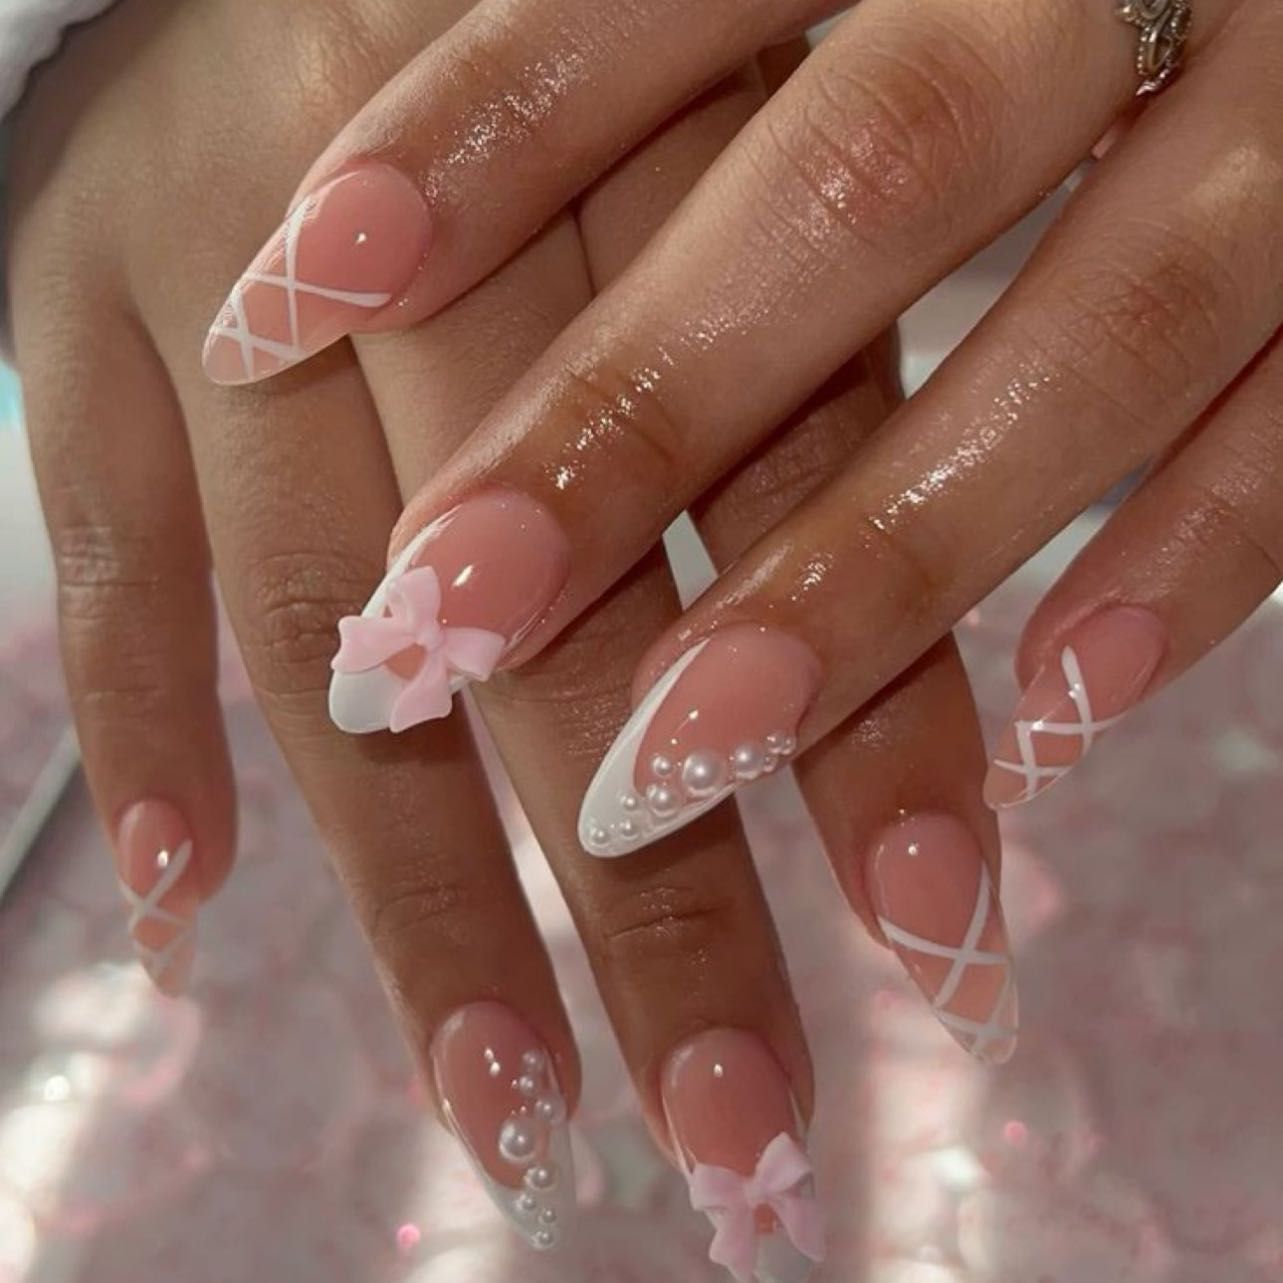 Nails by Somaly, 711 Nw 72nd Ave, Suite 1055, Miami, 33126